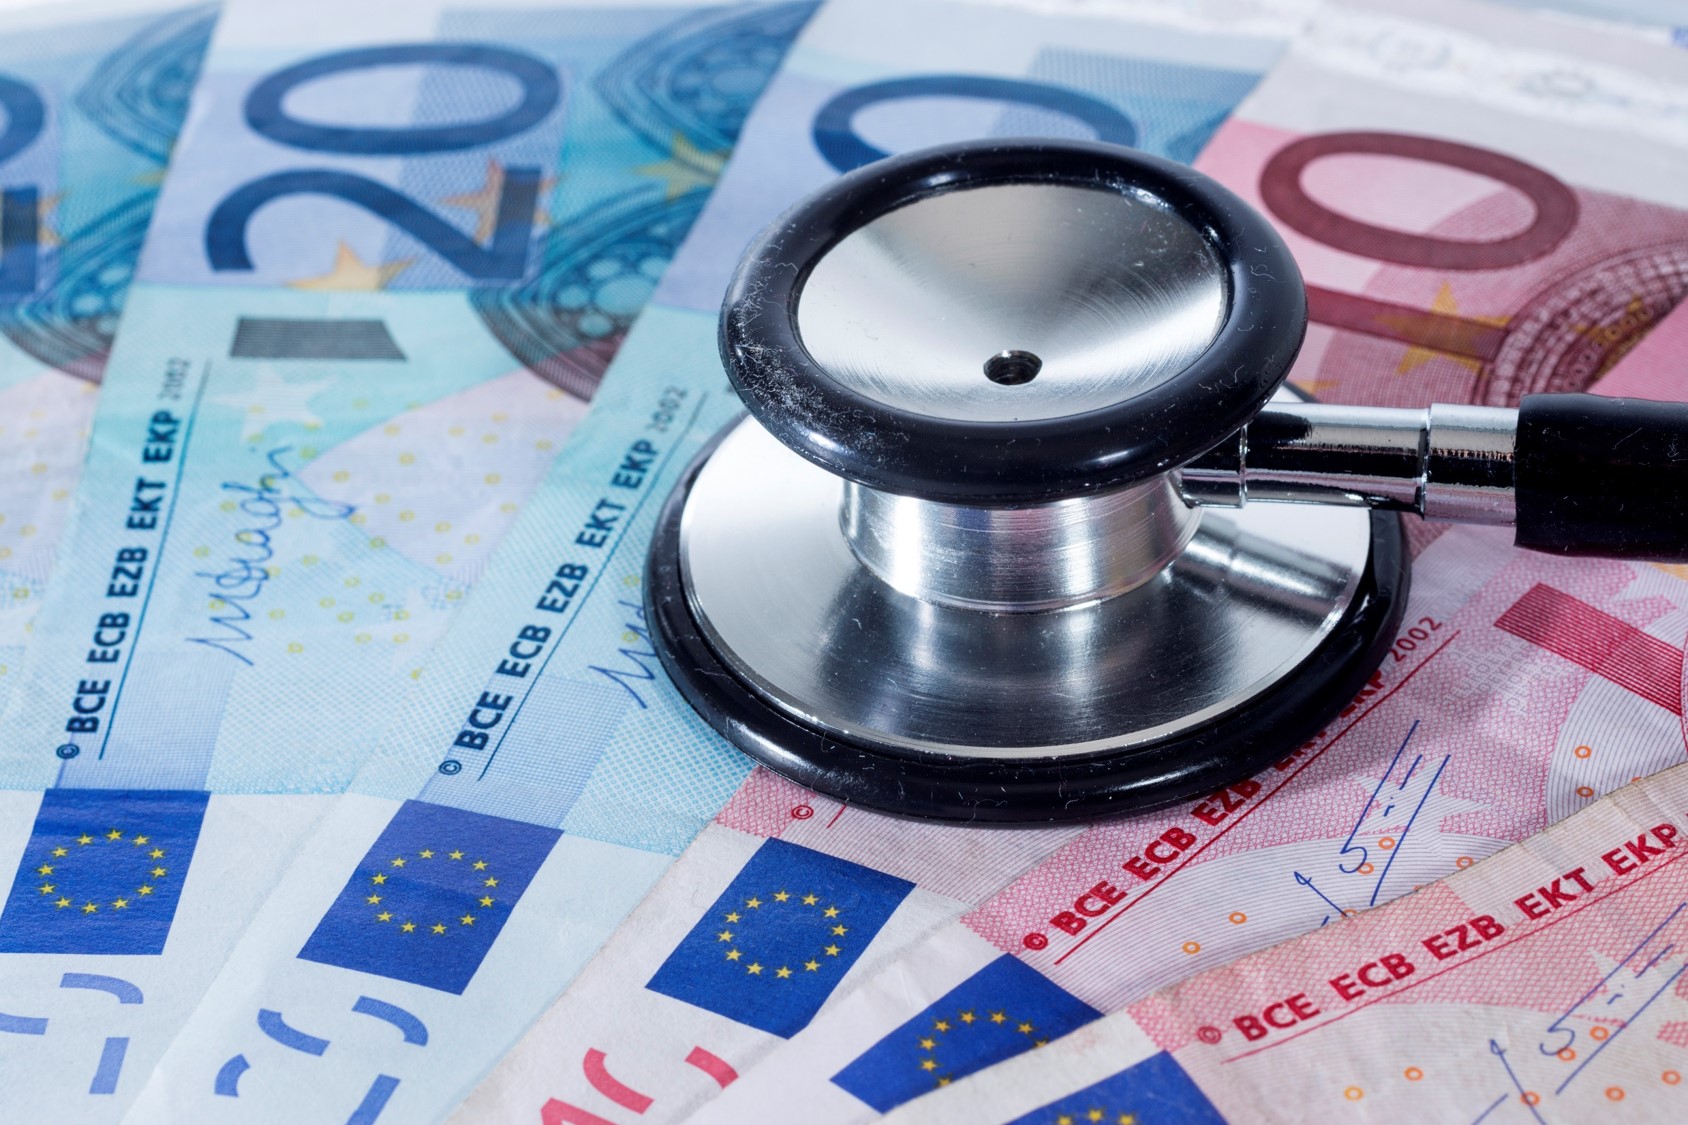 Healthcare free for EU expats, costly for UK expats